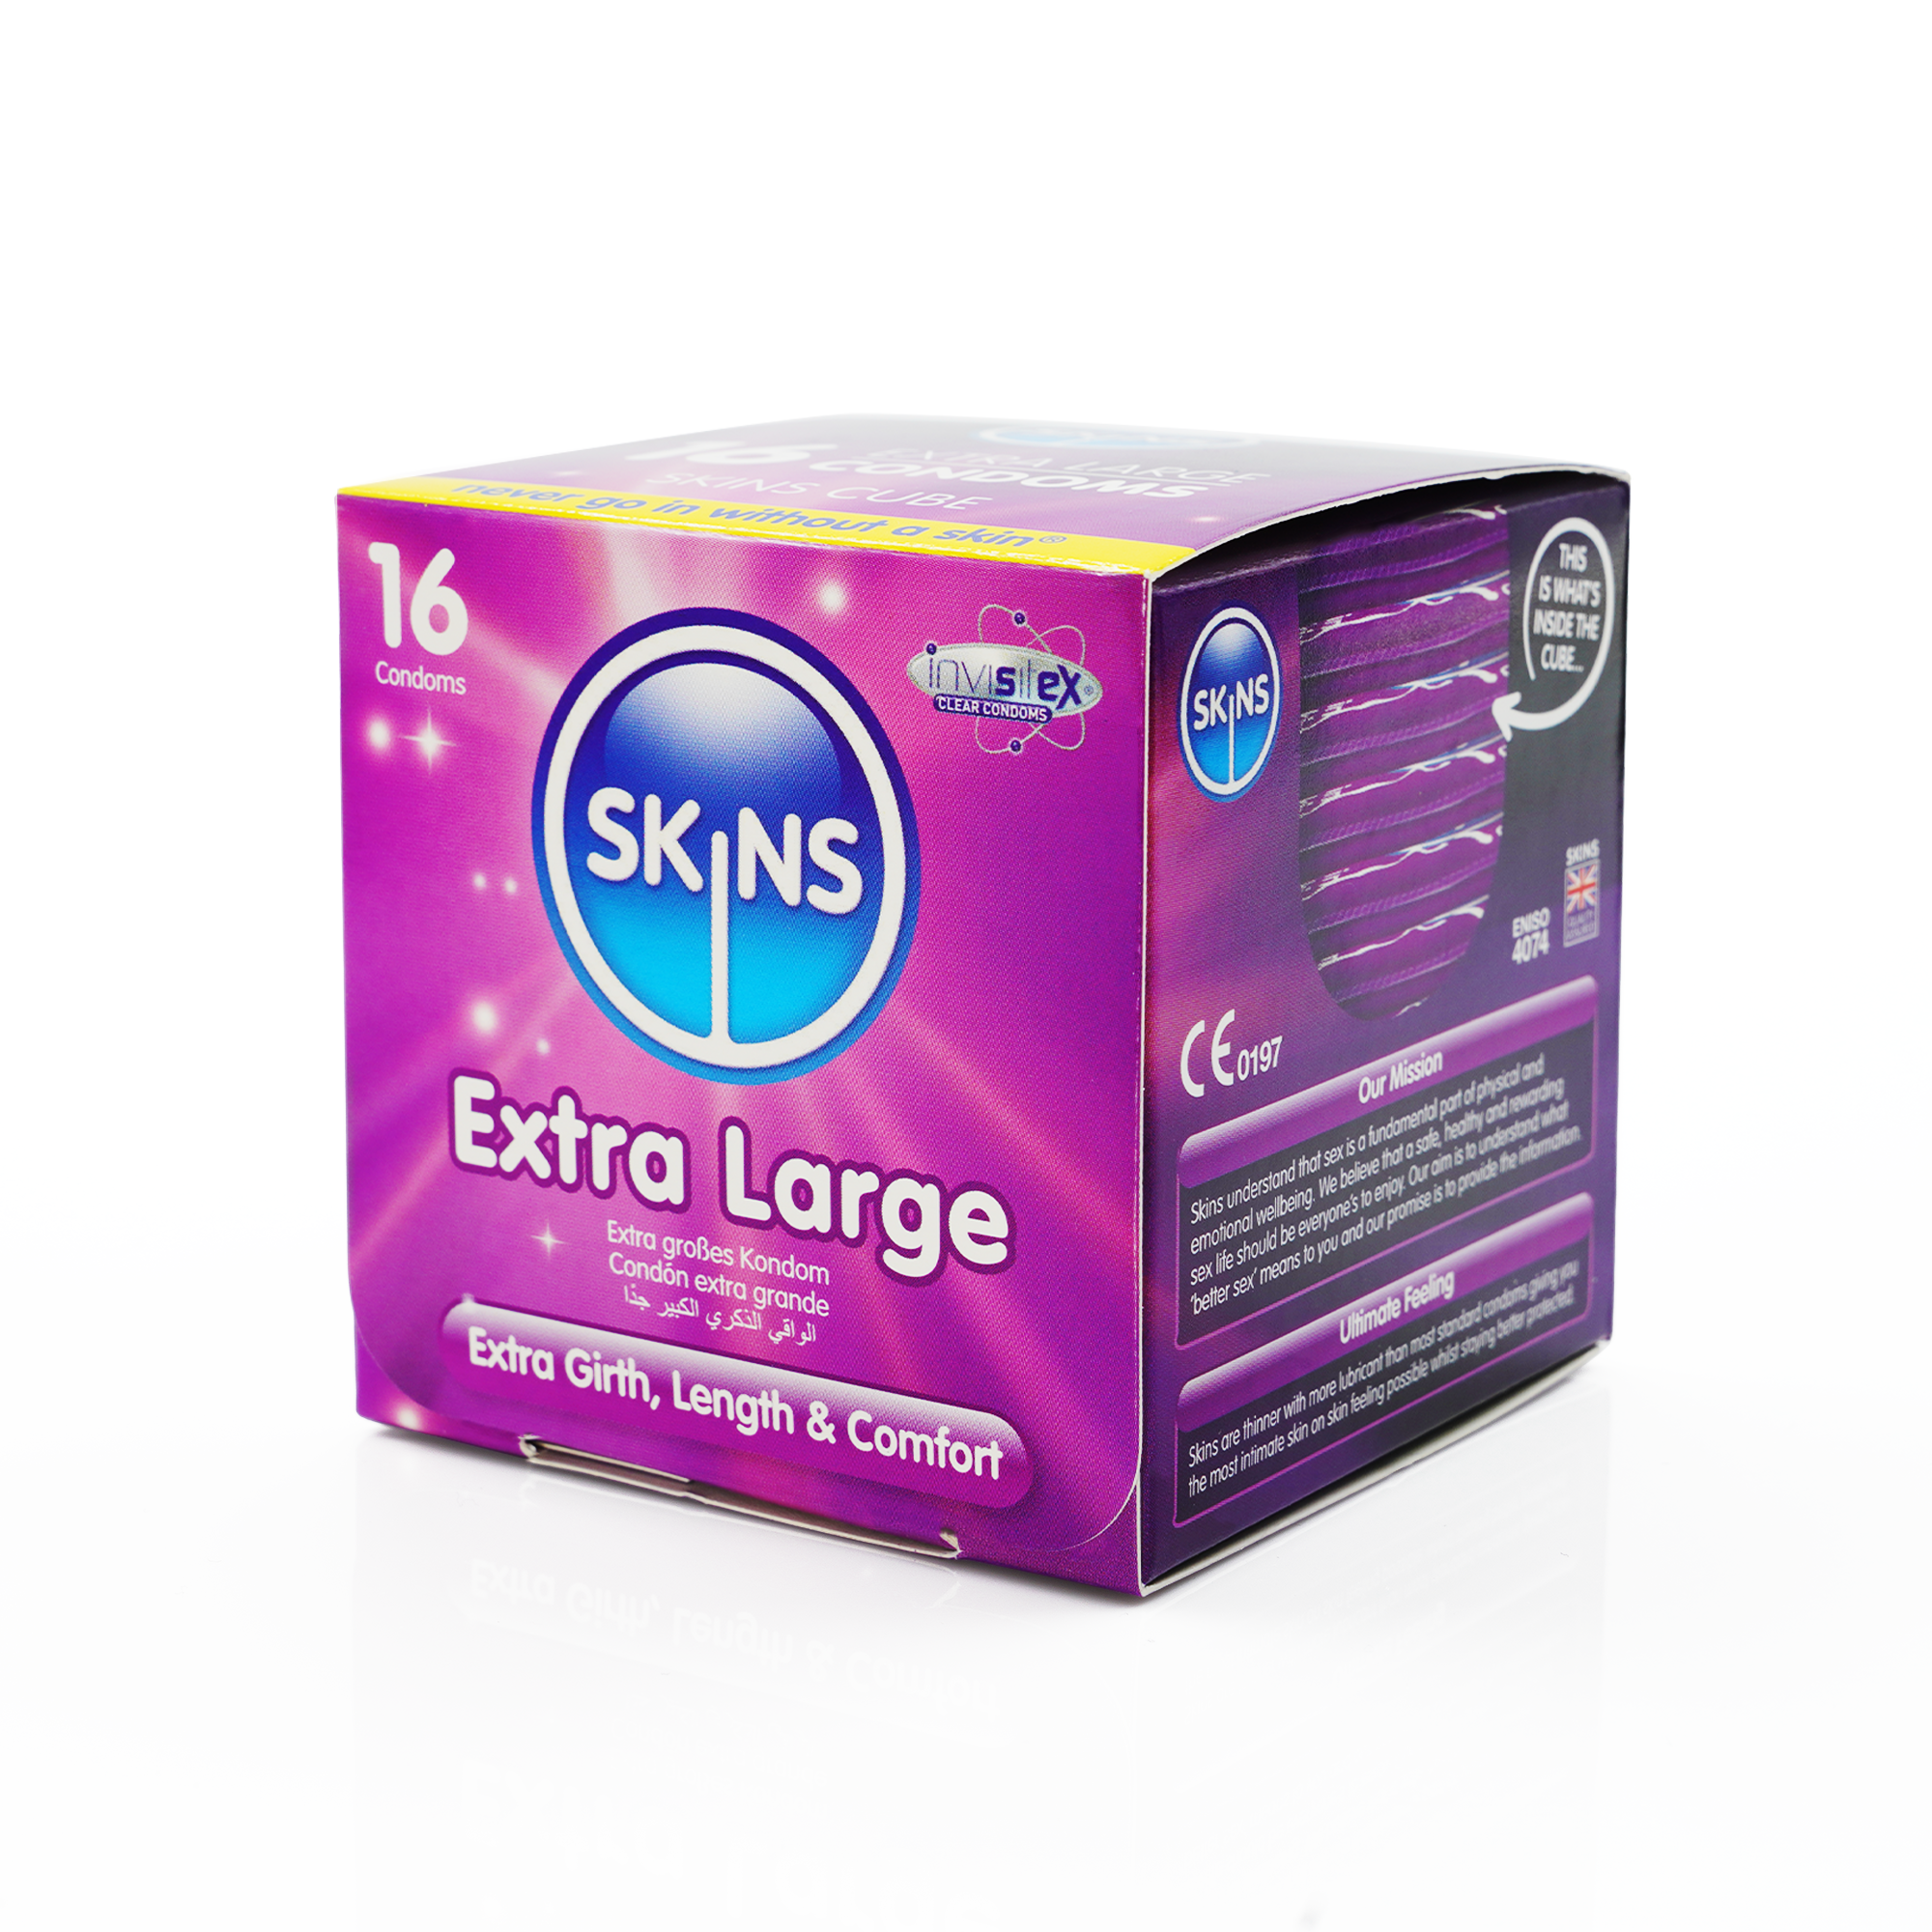 Skins Extra Large Condom-16 pack